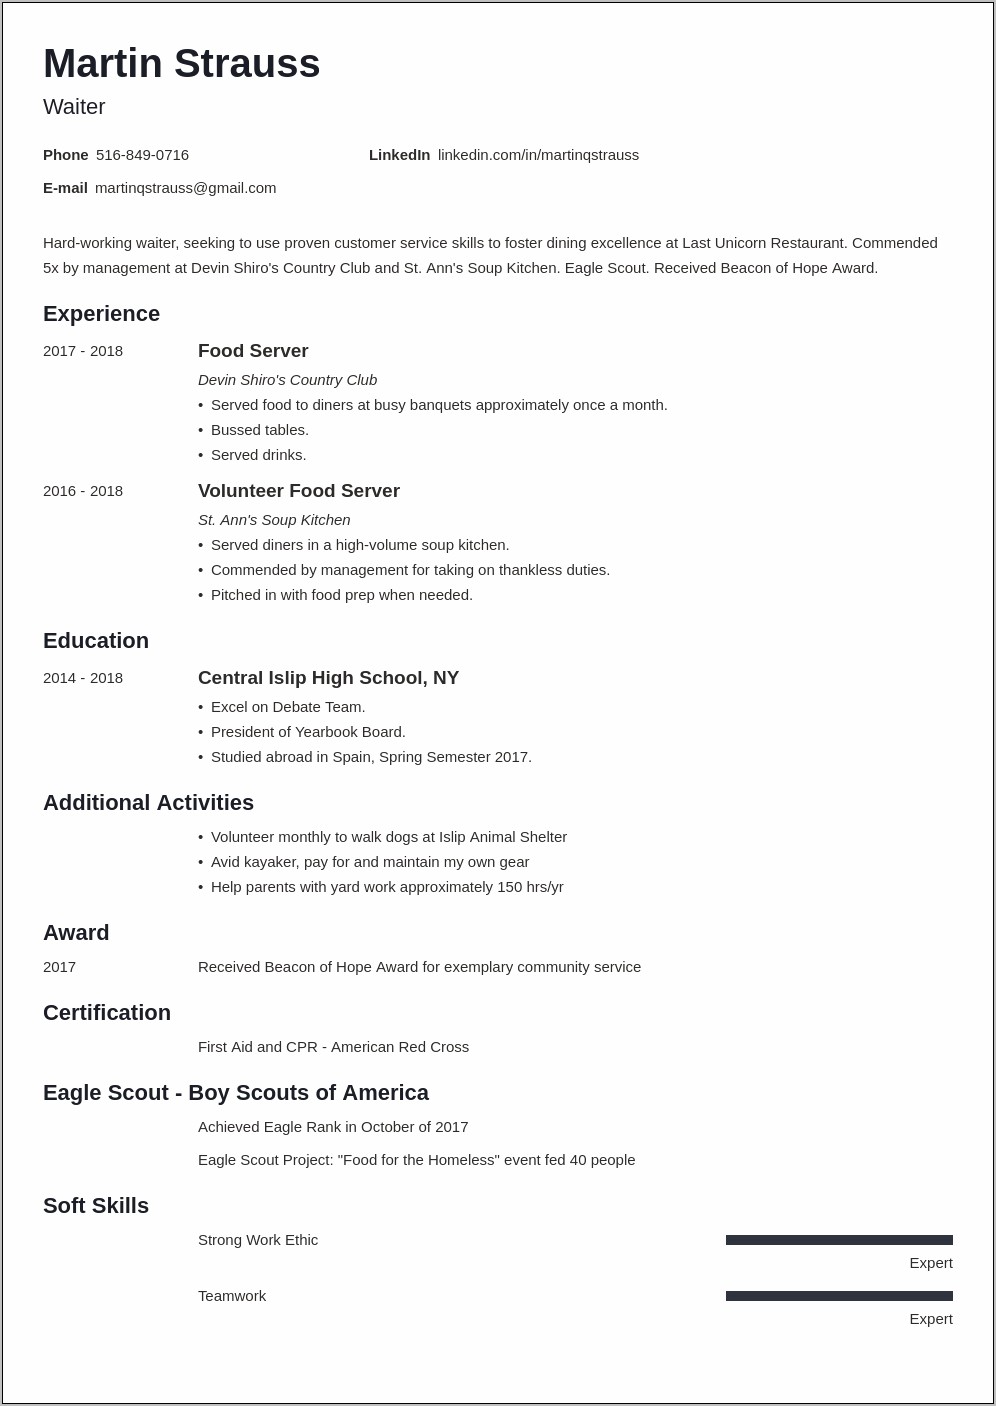 Resume For A Young Person In Resturant Work